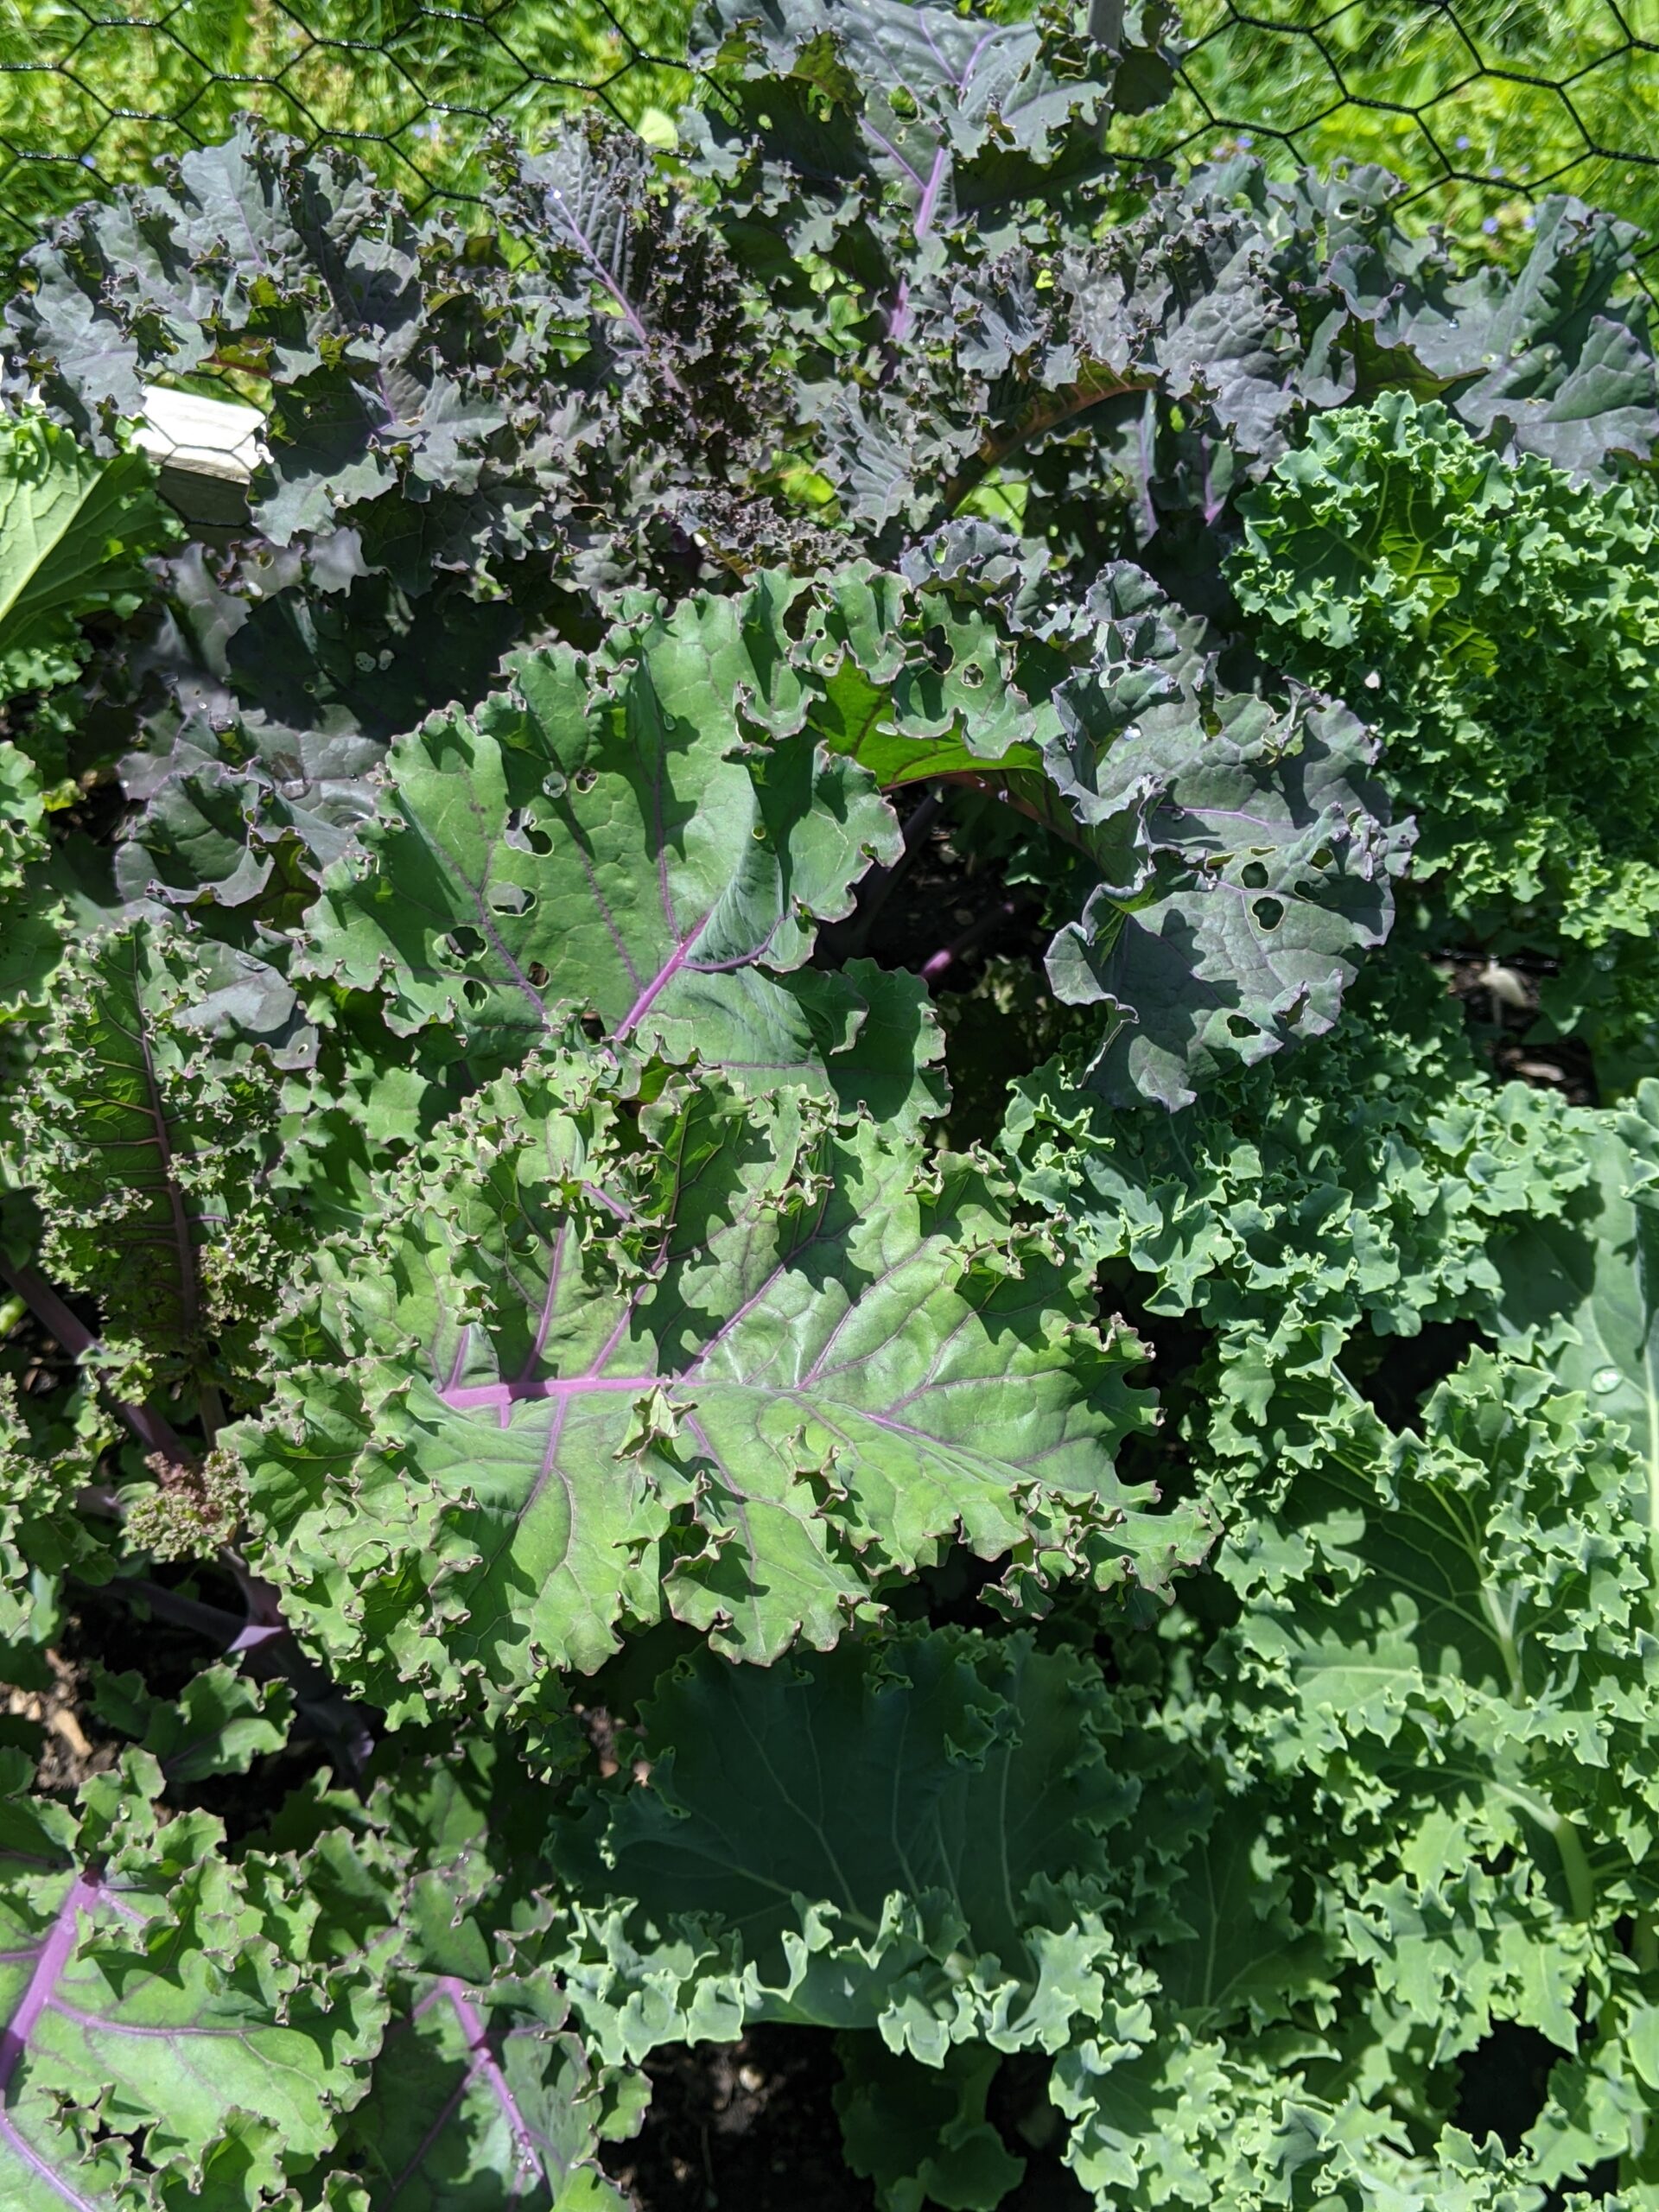 This image is of green and red kale leaves.